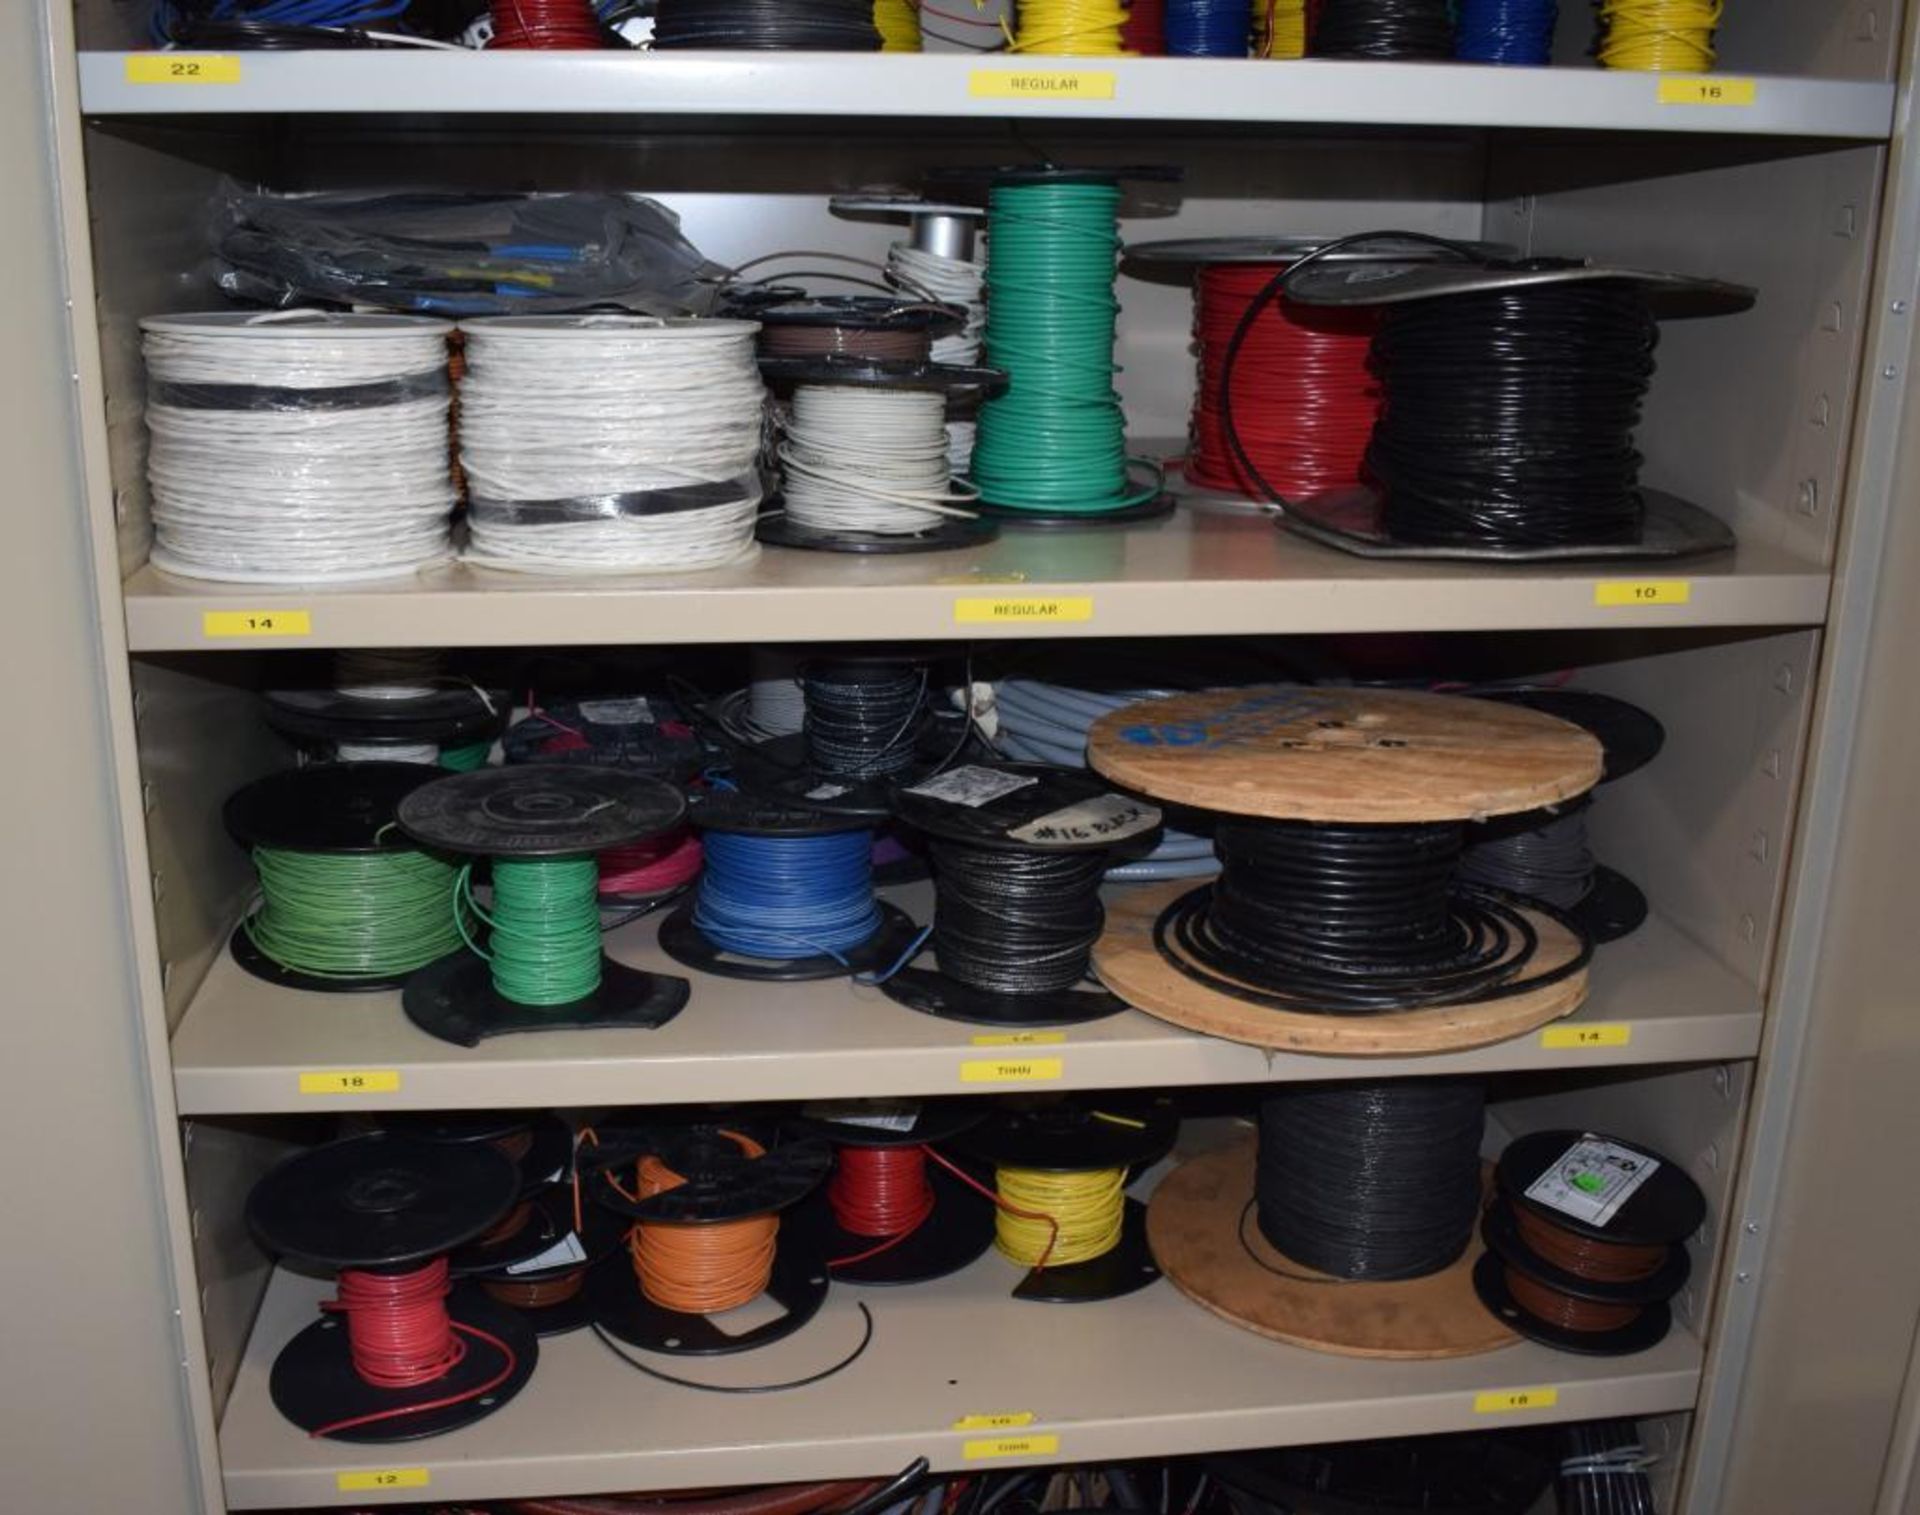 Lot Consisting Of: Miscellaneous Wire Spools, (1) 2 door metal cabinet, (2) wire spool carts. - Image 5 of 8